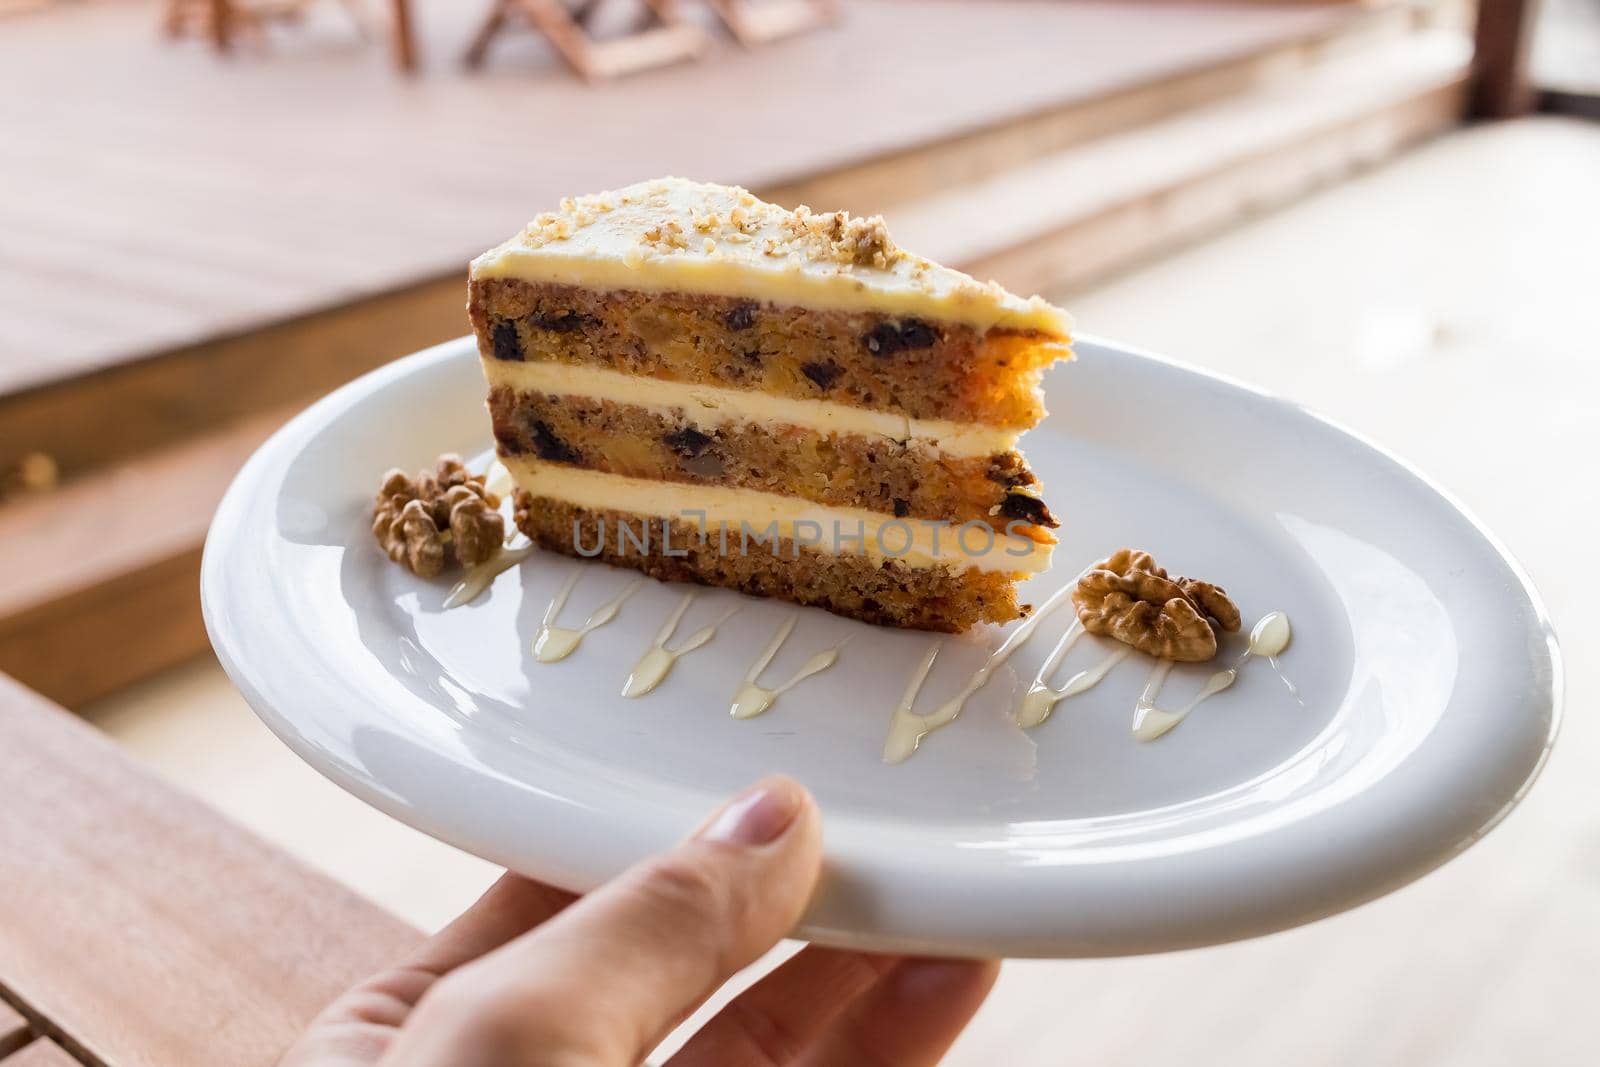 carrots and pumpkin cake with coffee cream in a cut on the plate